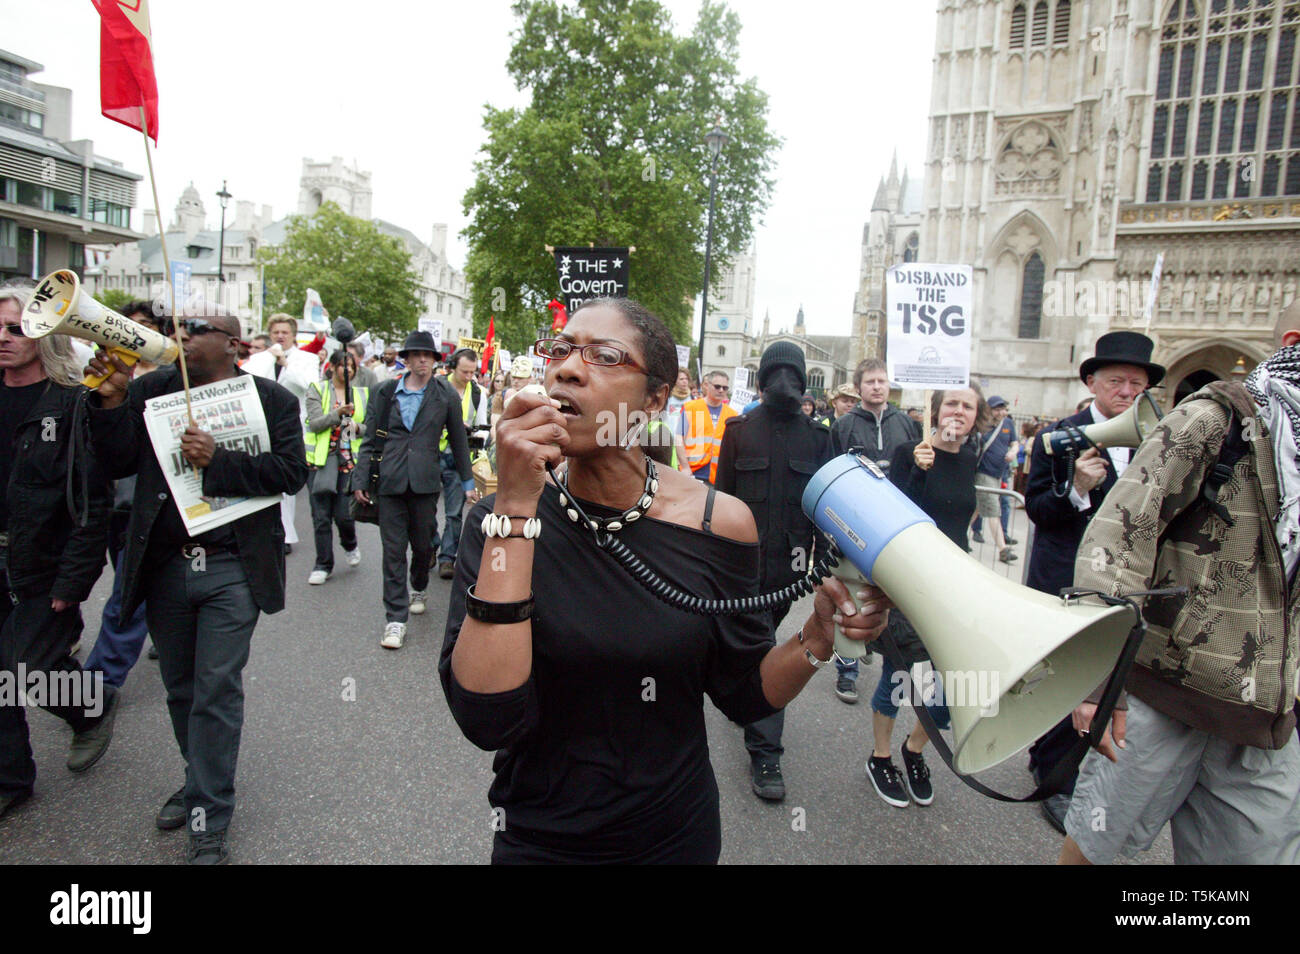 Marcia Rigg at 'Coalition Against Police Violence' march. new Scotland yard. Calling for end to police violence. London. 23/05/2009 Stock Photo